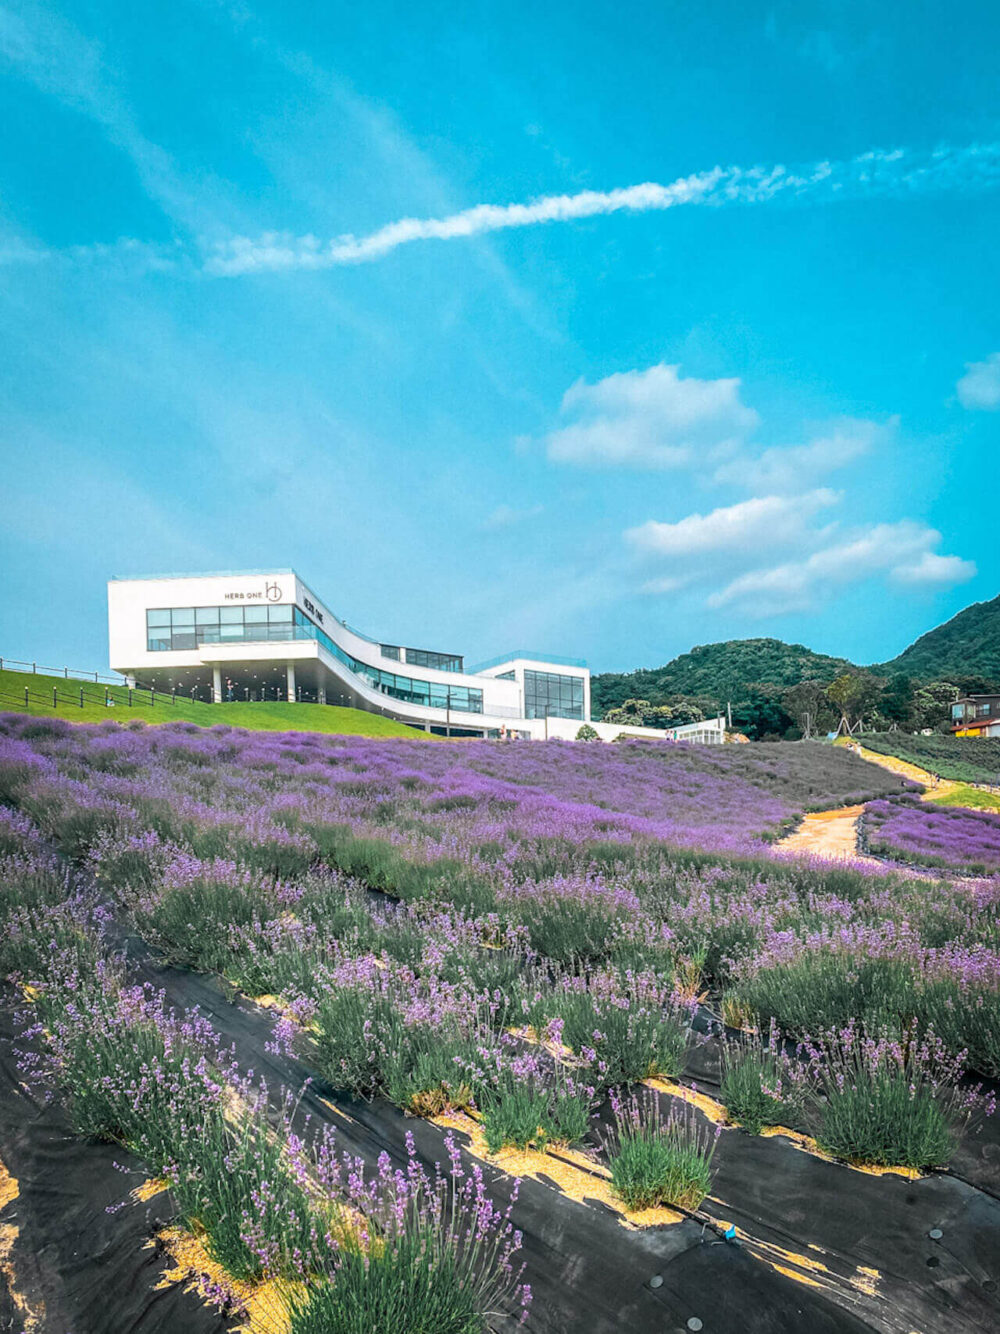 Herb One Cafe and Lavender Festival in Korea